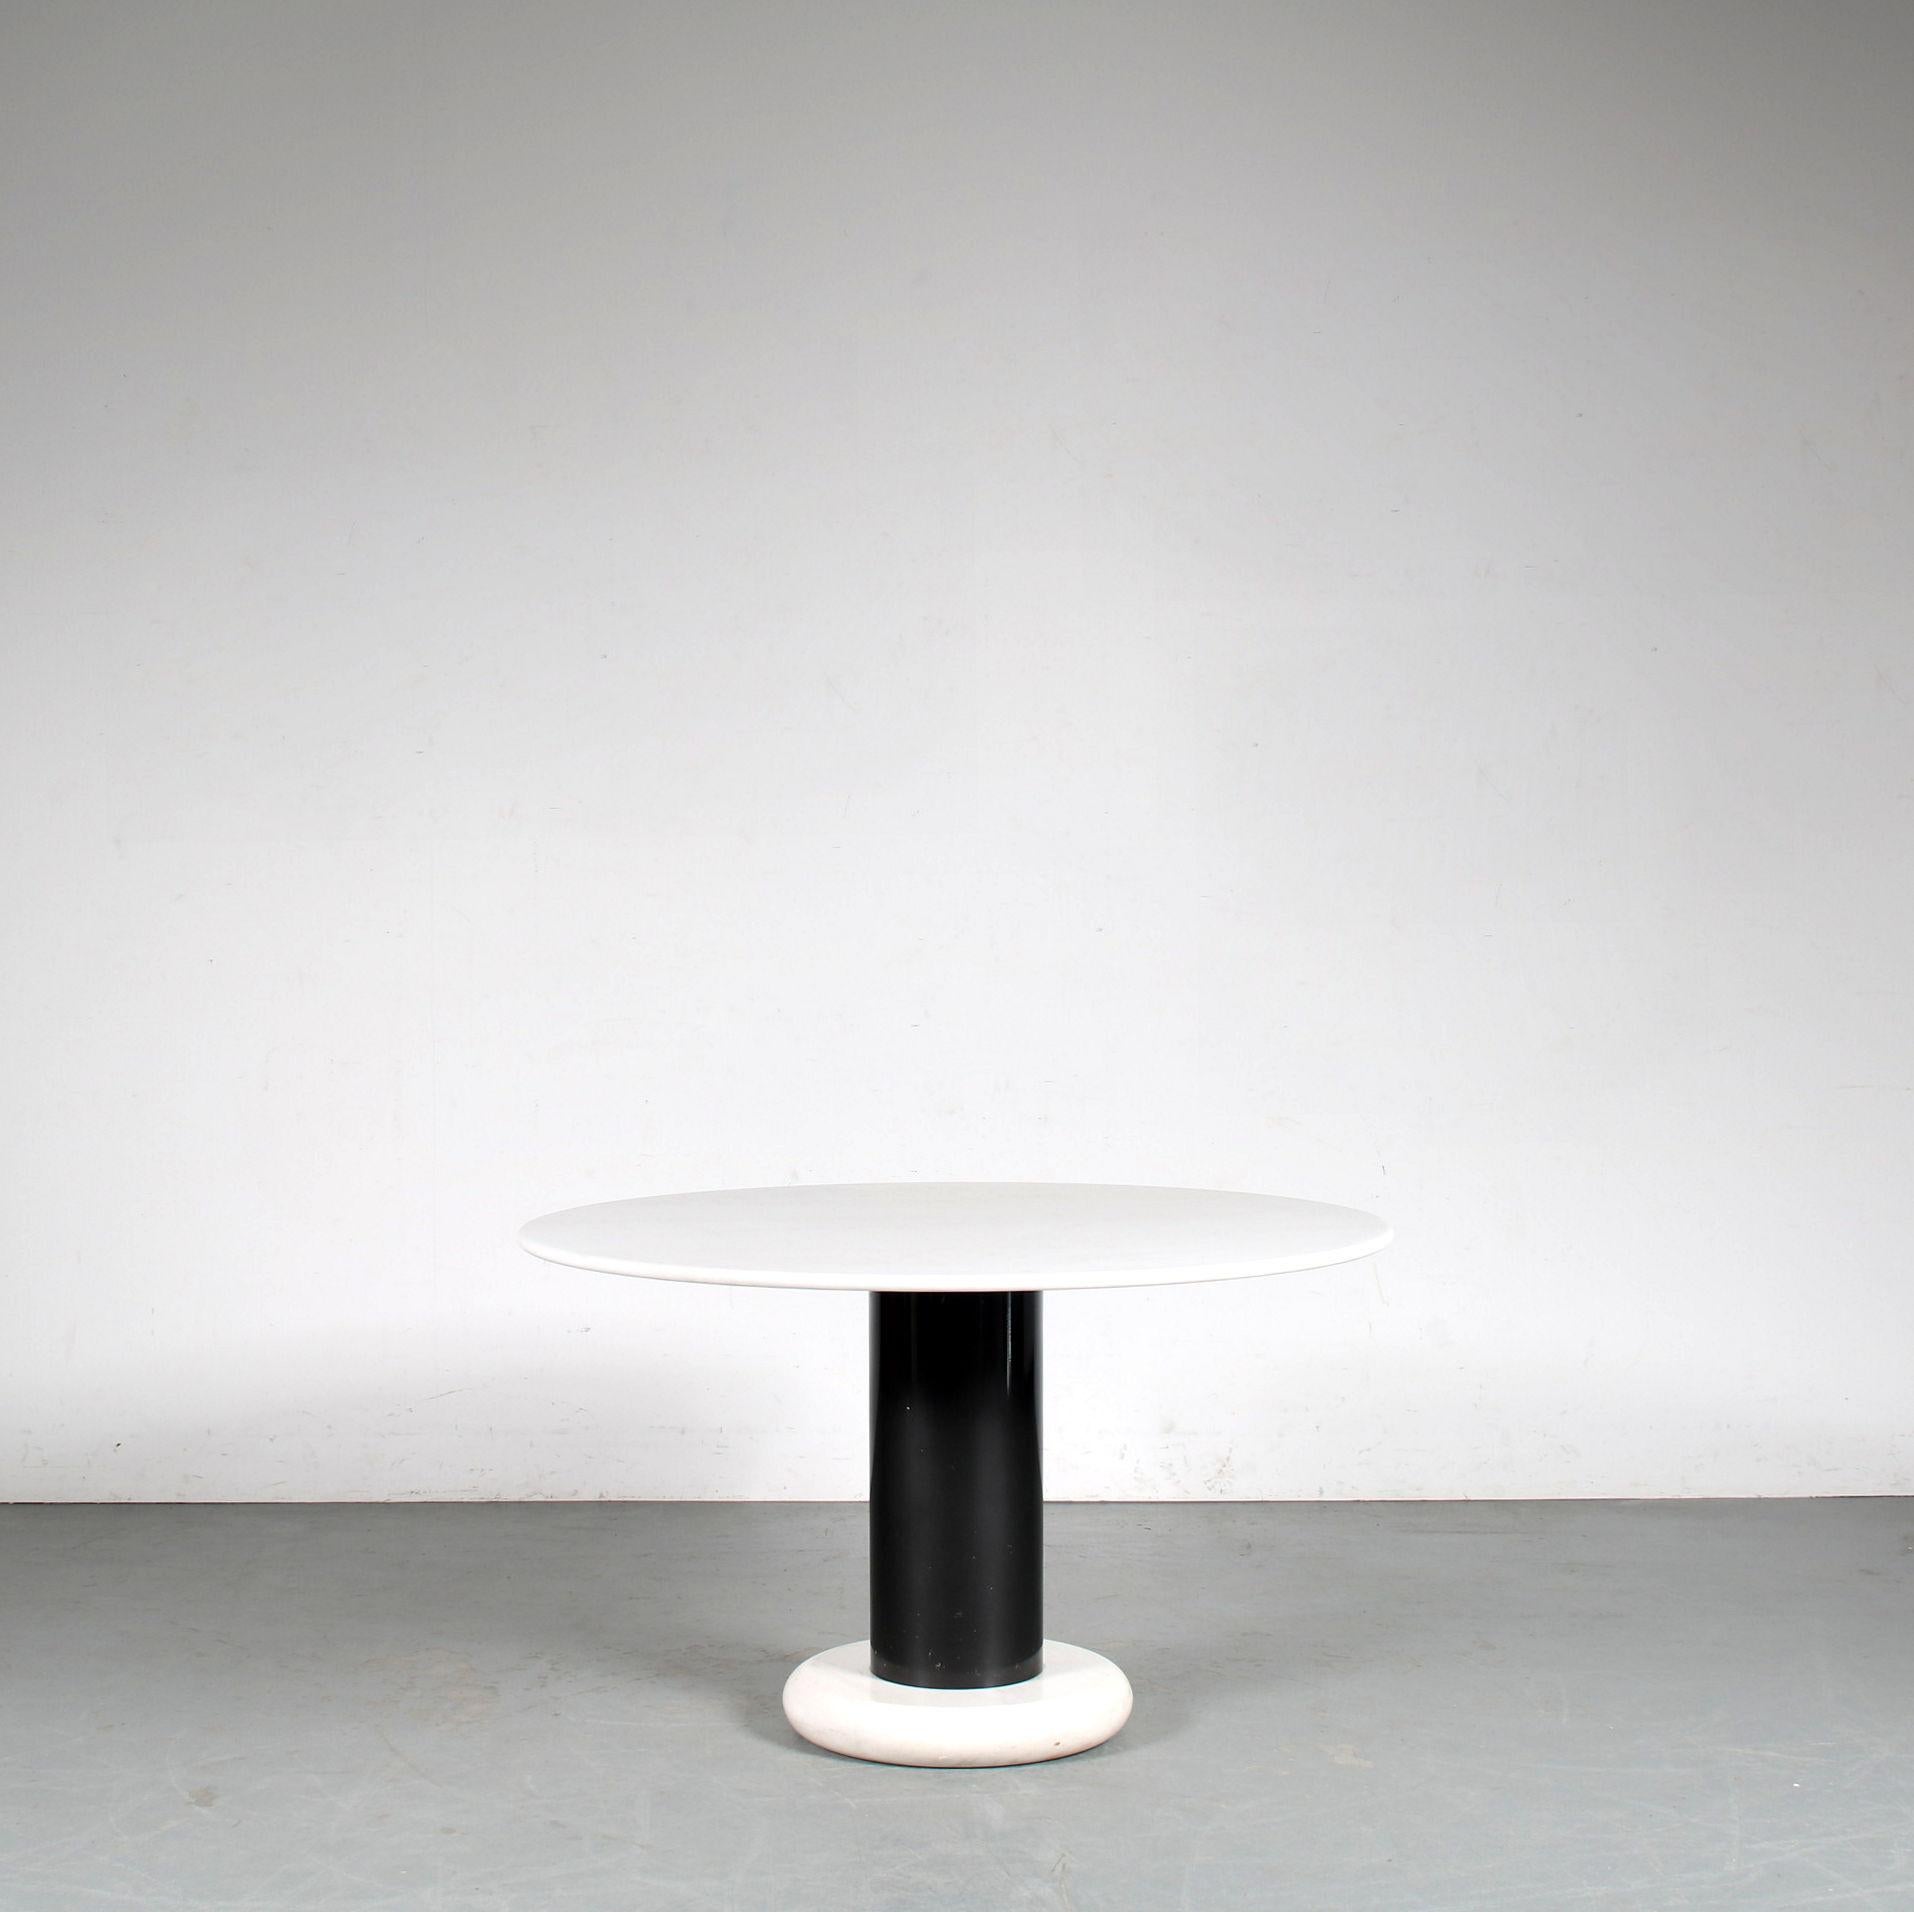 A wonderful dining table, model “Lotorosso” designed by Ettore Sottsass, manufactured by Poltronova in Italy around 1960.

It has an eye-catching and highly recognizable design! The round foot and round top are both made of beautiful quality white